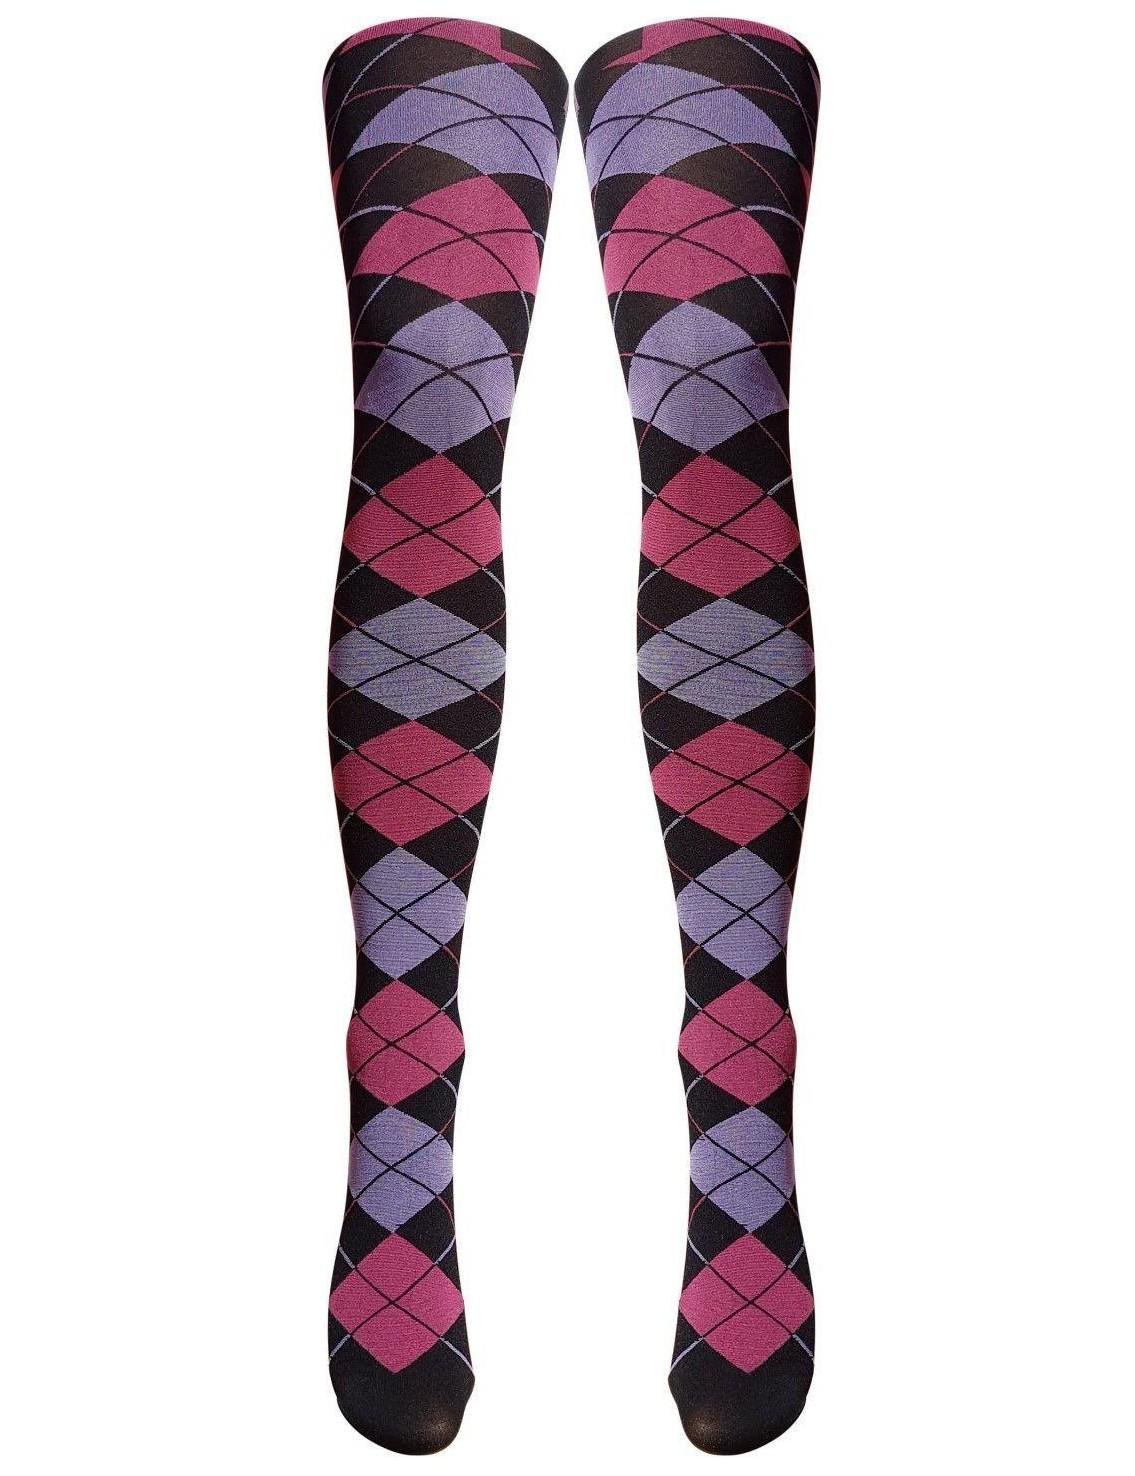 Silver Legs Argyle Check Patterned Tights - Kiss Tights